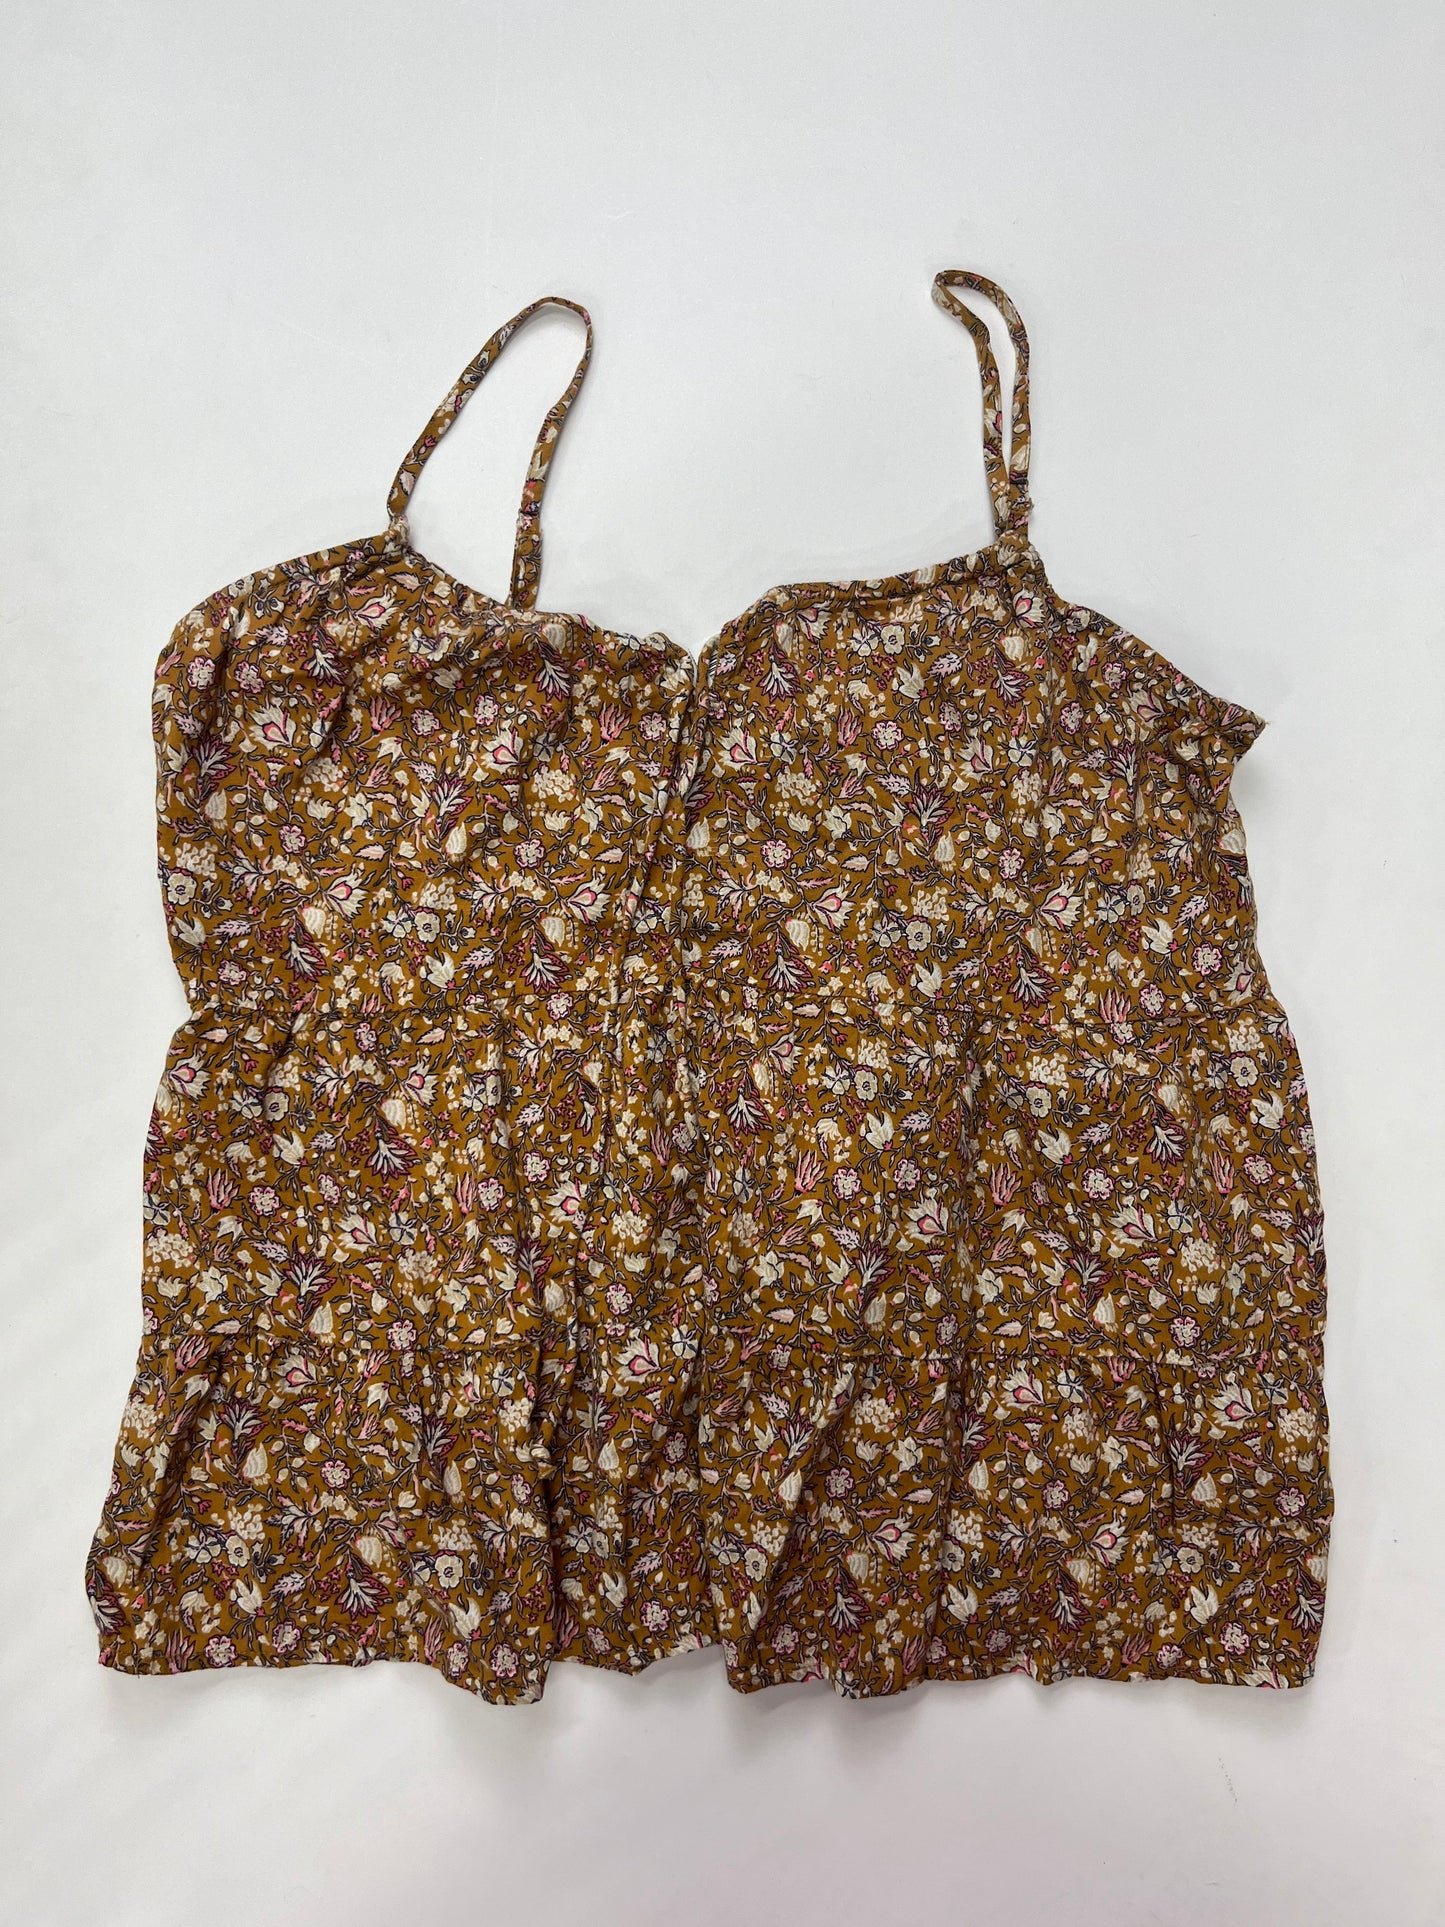 Floral Tank Top Old Navy O, Size M